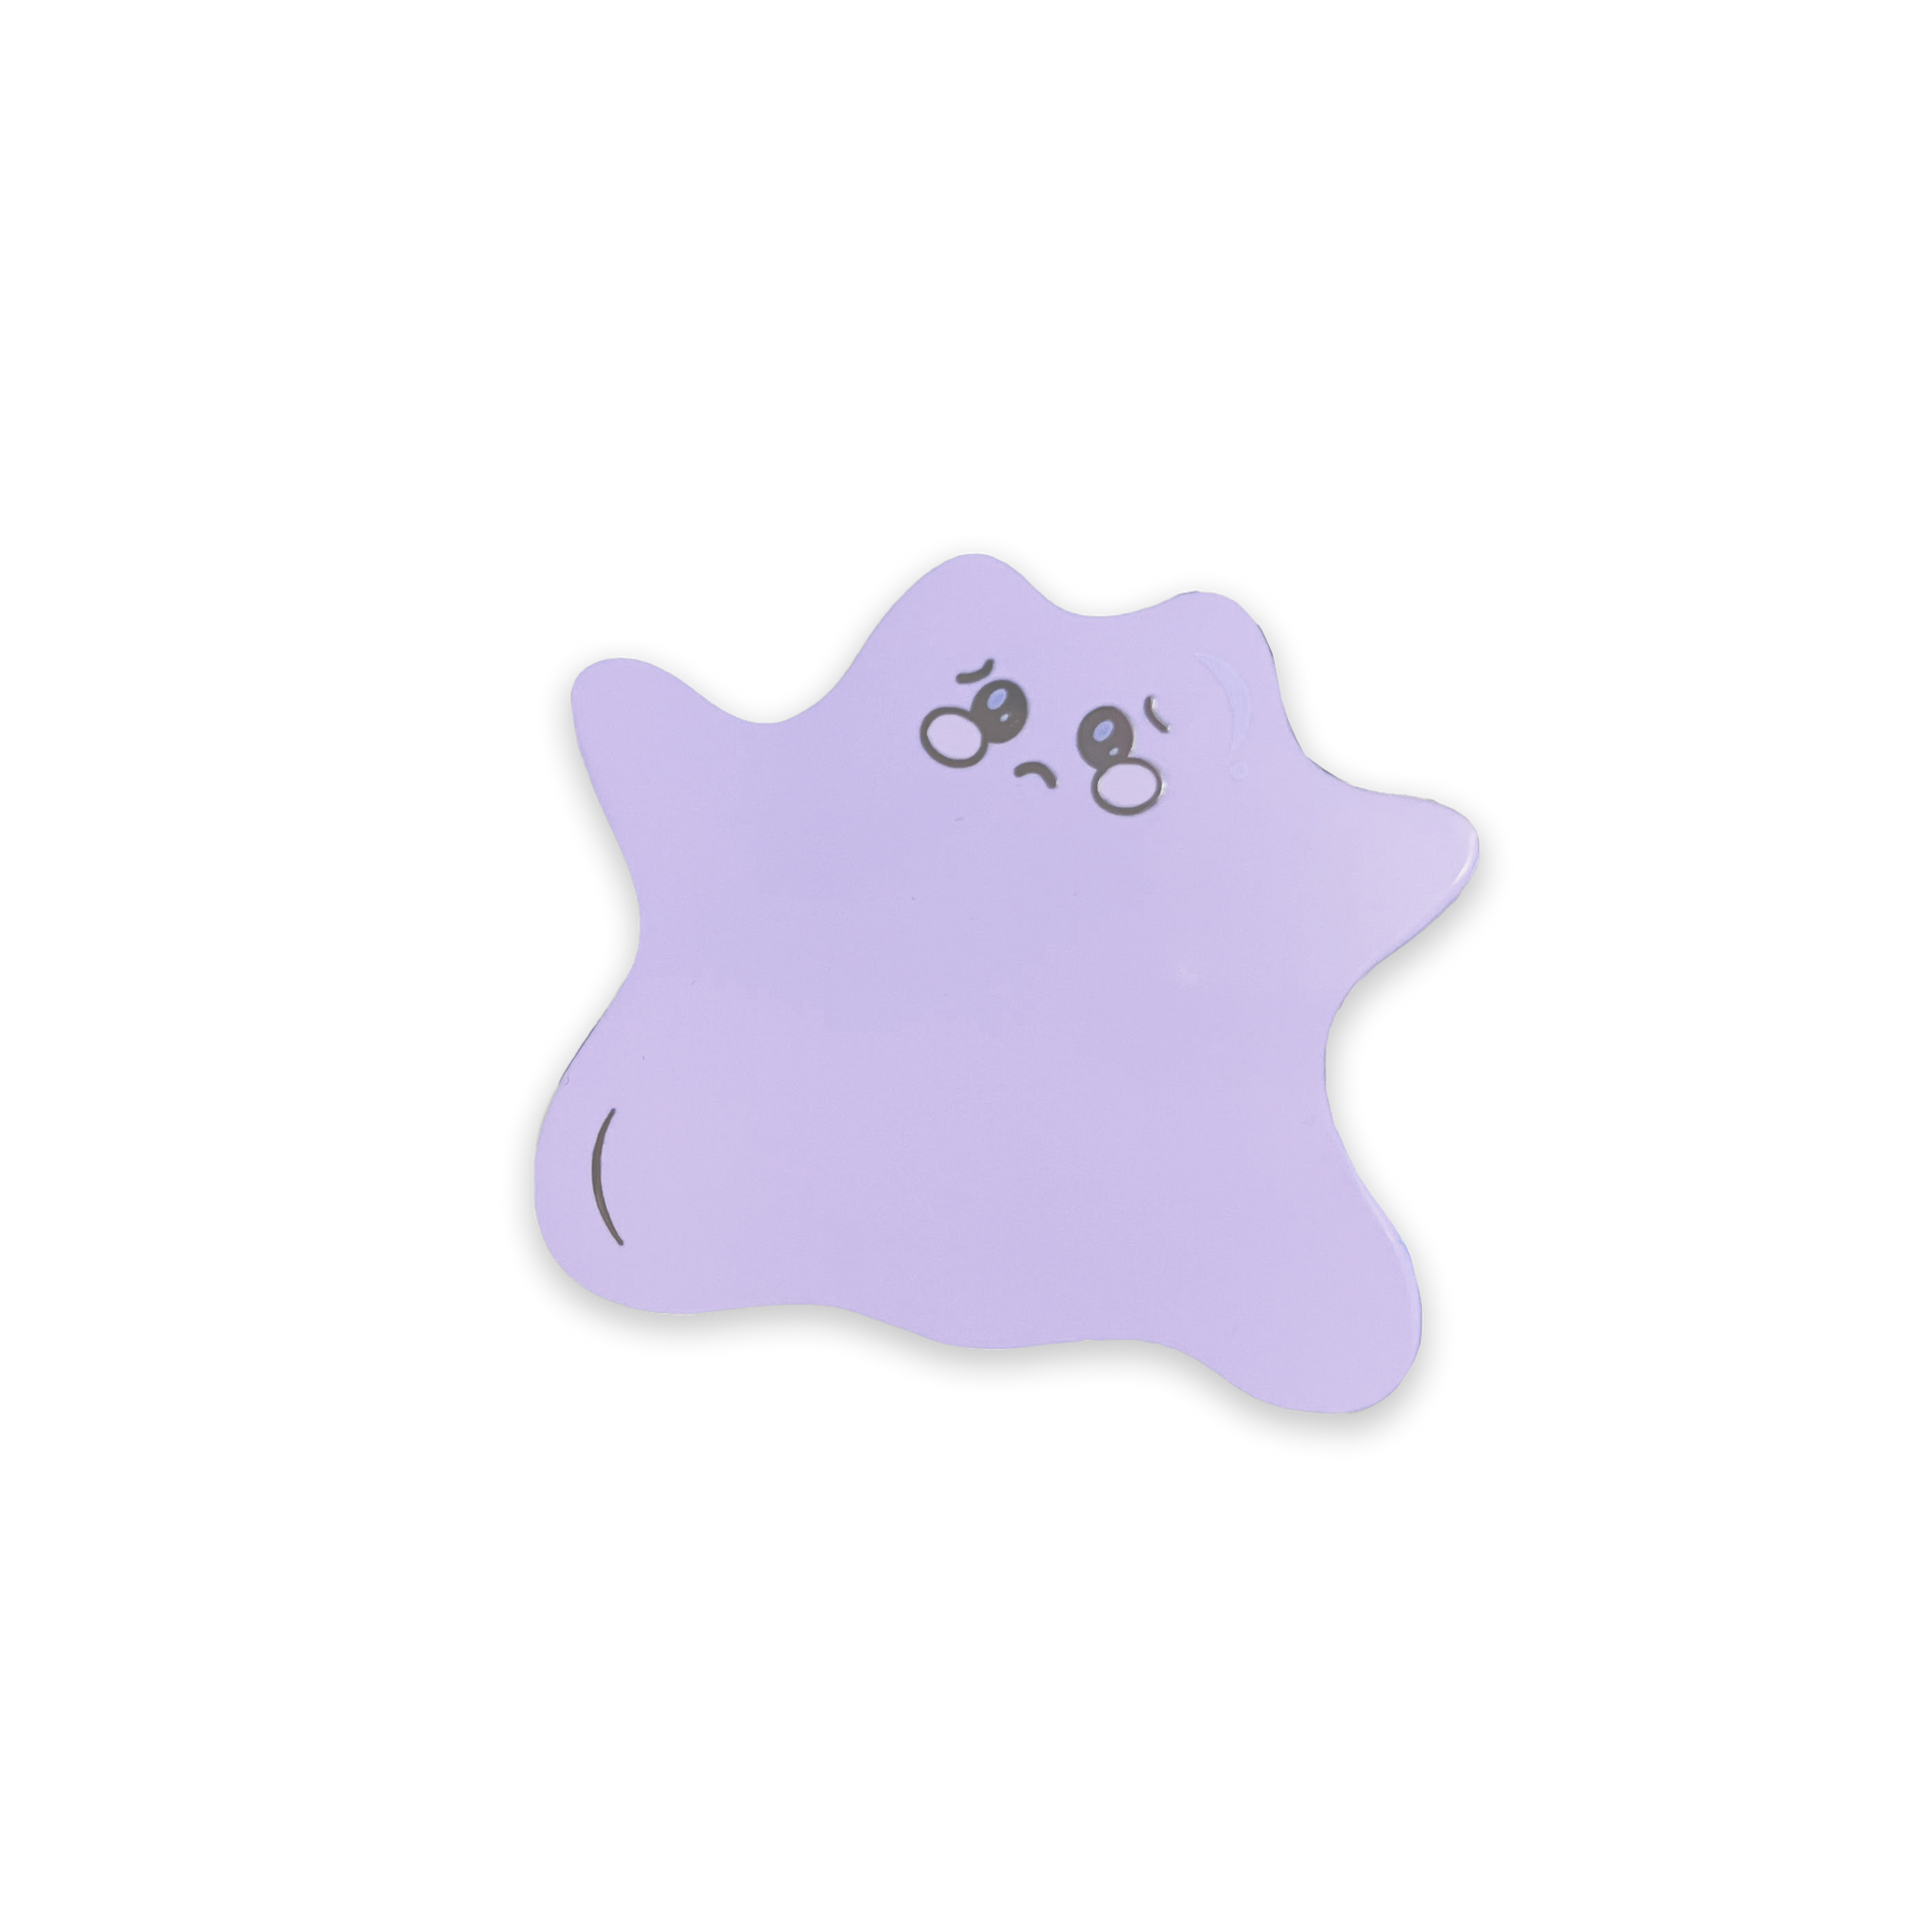 Crybaby Ditto Enamel Pin in Silver Variant